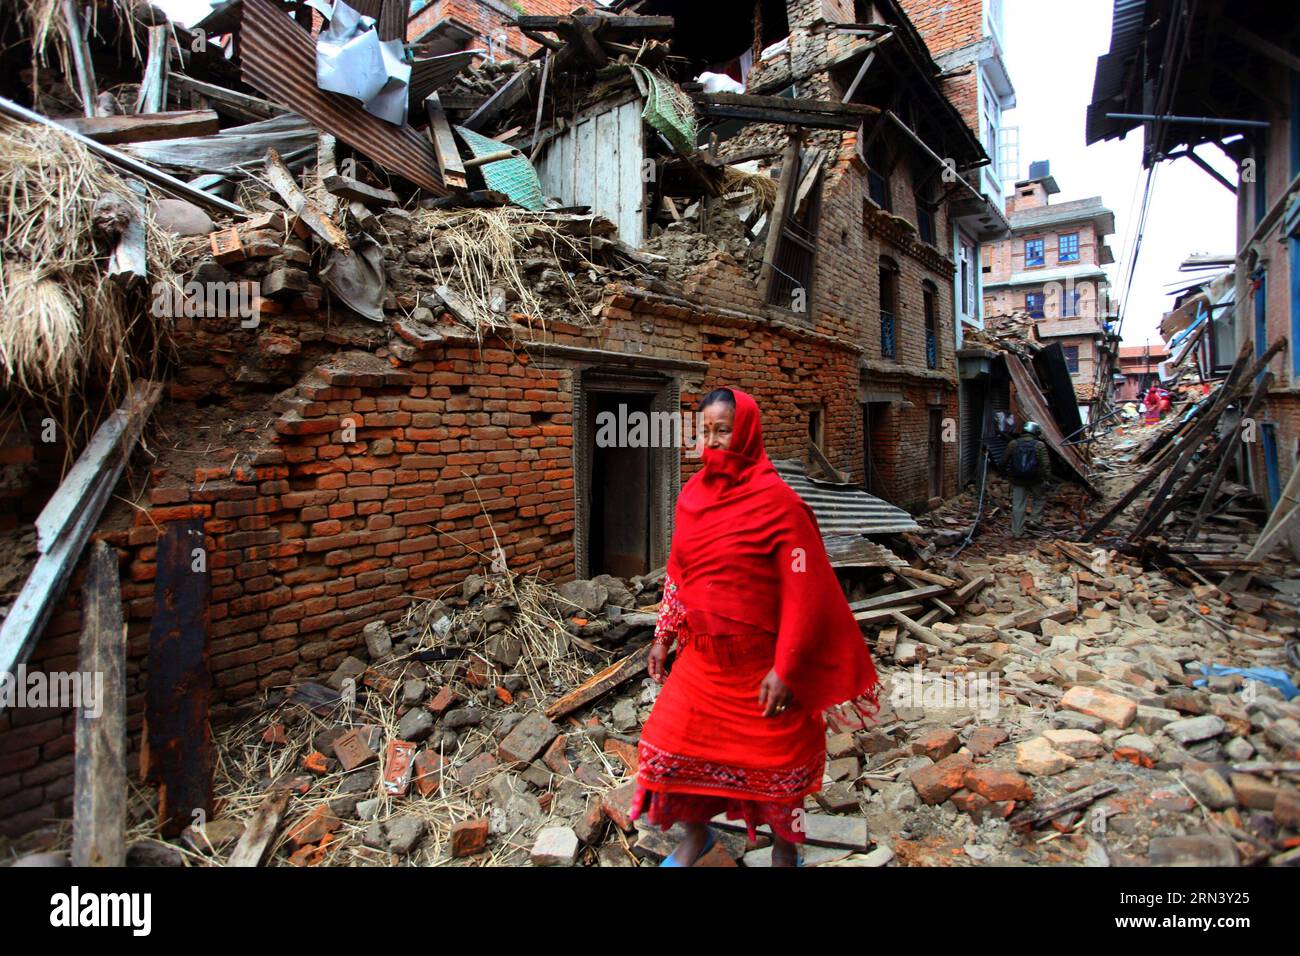 (150429) -- LALITPUR, April 29, 2015 -- A woman walks past the debris after earthquake in Lalitpur, Nepal, April 29, 2015. The 7.9-magnitude quake hit Nepal at midday on Saturday. The death toll from the powerful earthquake has soared to 5,057 and a total of 10,915 others were injured. ) (djj) NEPAL-LALITPUR-EARTHQUAKE-AFTERMATH SunilxSharma PUBLICATIONxNOTxINxCHN   Lalitpur April 29 2015 a Woman Walks Past The debris After Earthquake in Lalitpur Nepal April 29 2015 The 7 9 magnitude Quake Hit Nepal AT midday ON Saturday The Death toll from The Powerful Earthquake has soared to 5  and a total Stock Photo